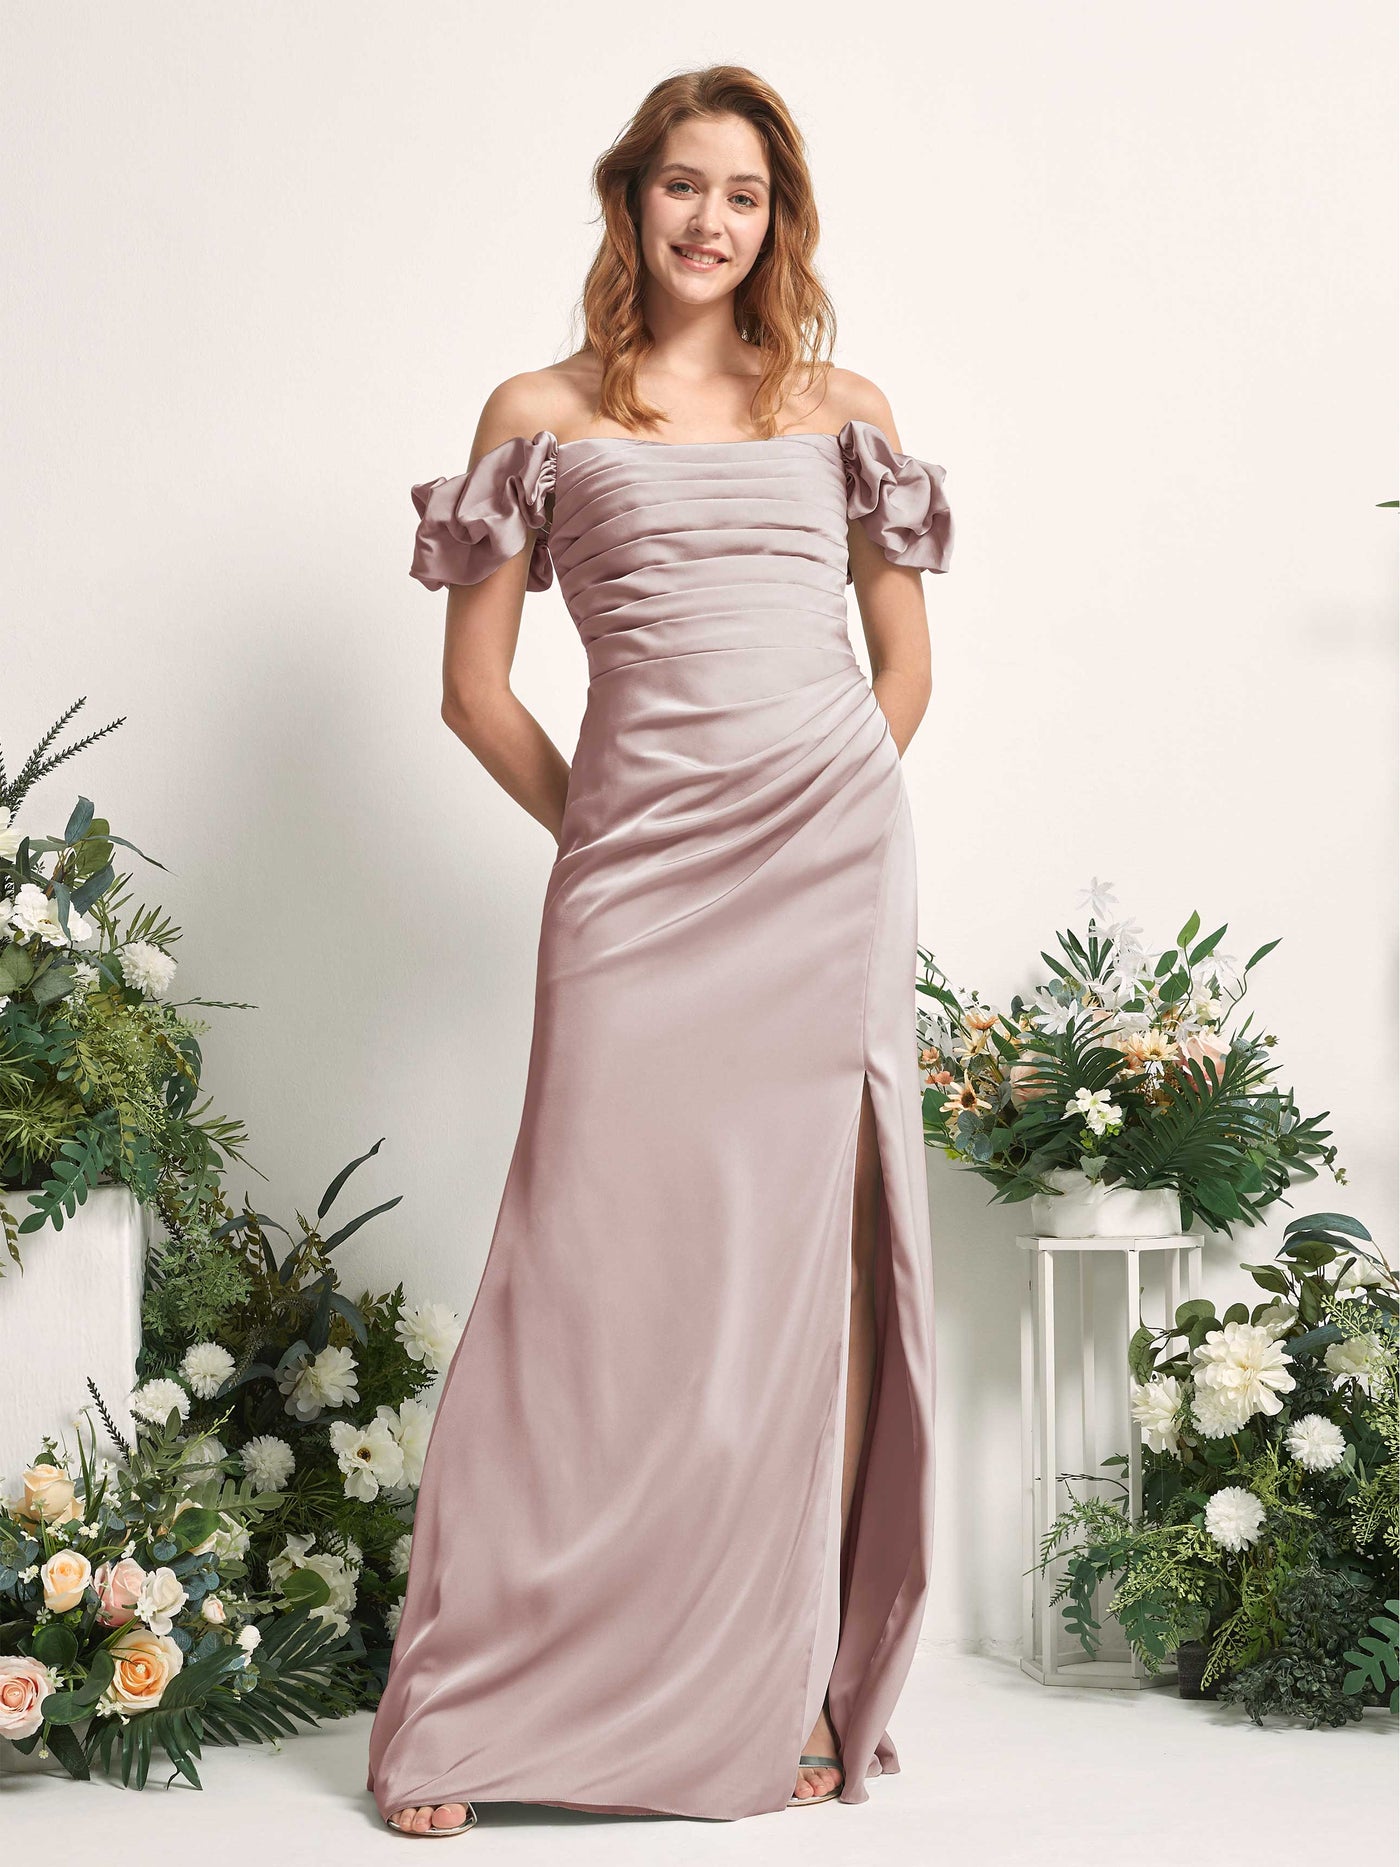 Dusty Rose Bridesmaid Dresses Bridesmaid Dress A-line Satin Off Shoulder Full Length Short Sleeves Wedding Party Dress (80226454)#color_dusty-rose